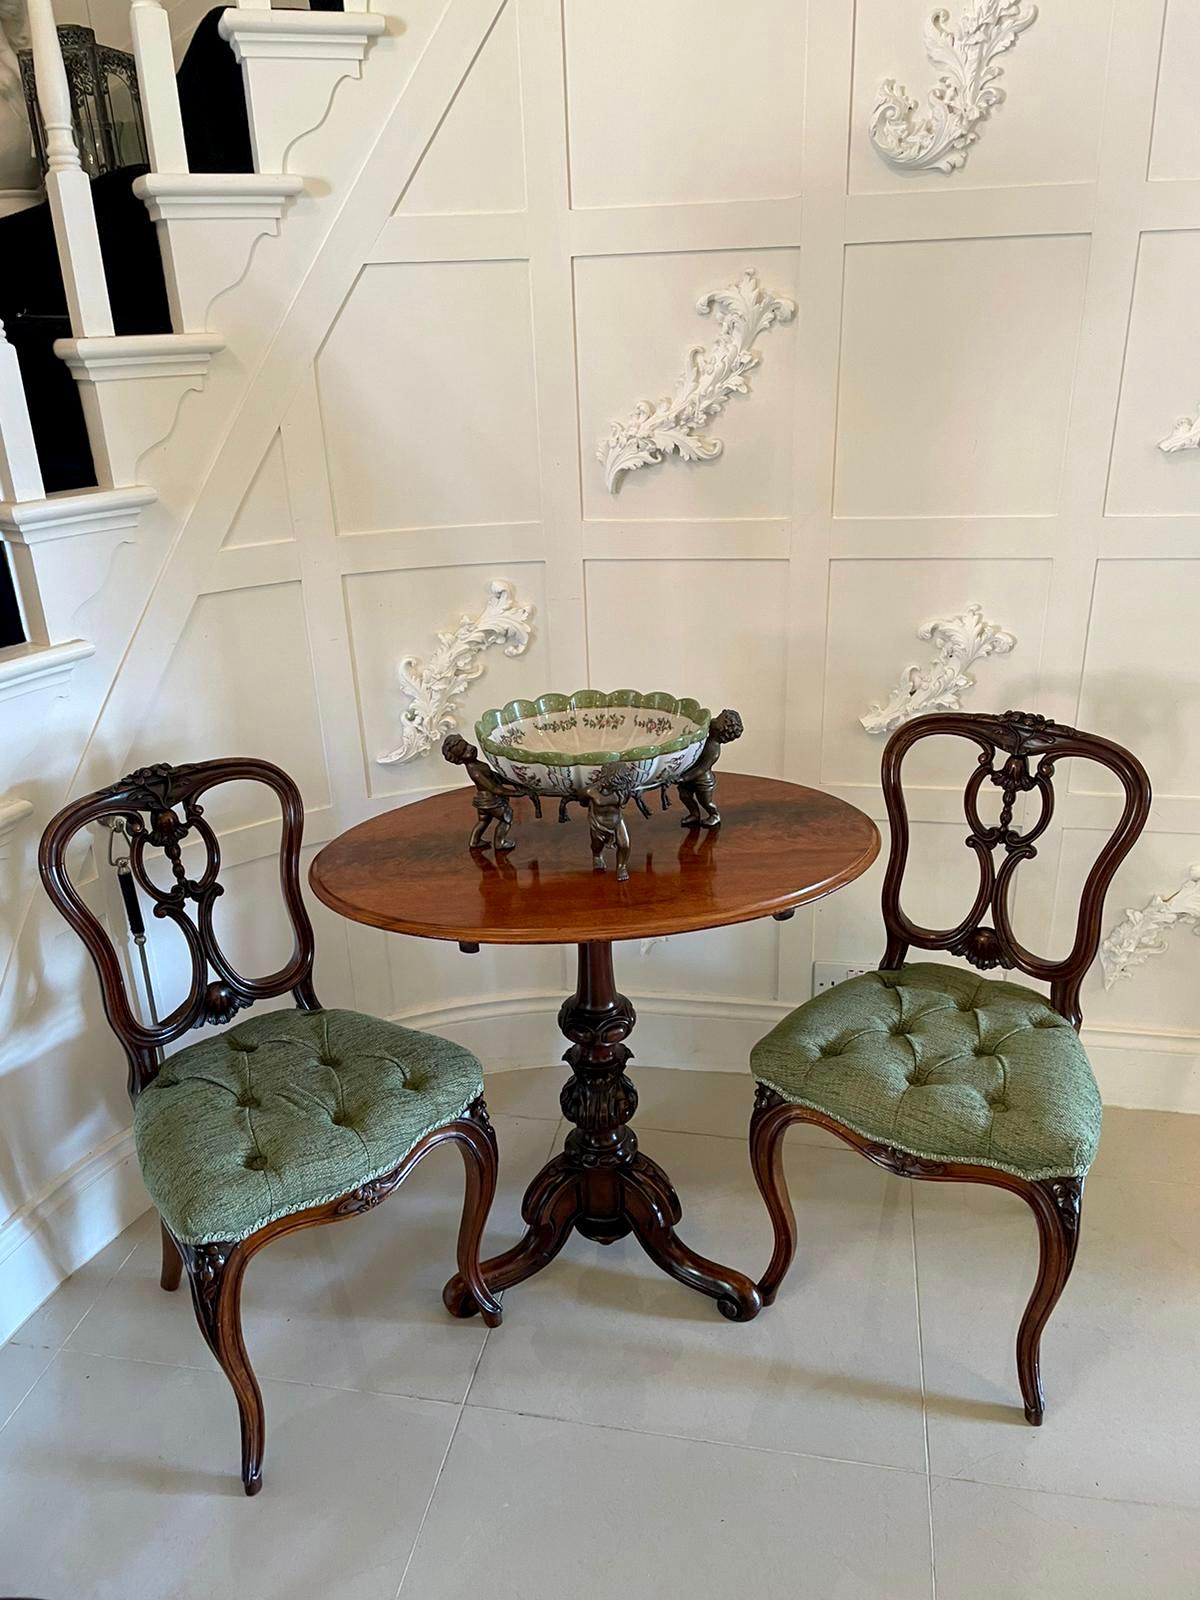 Quality antique Victorian oval figured walnut lamp table having a quality oval figured walnut tilt top with a thumb moulded edge supported by a fantastic turned shaped carved column. It is raised on shaped carved cabriole legs with scroll